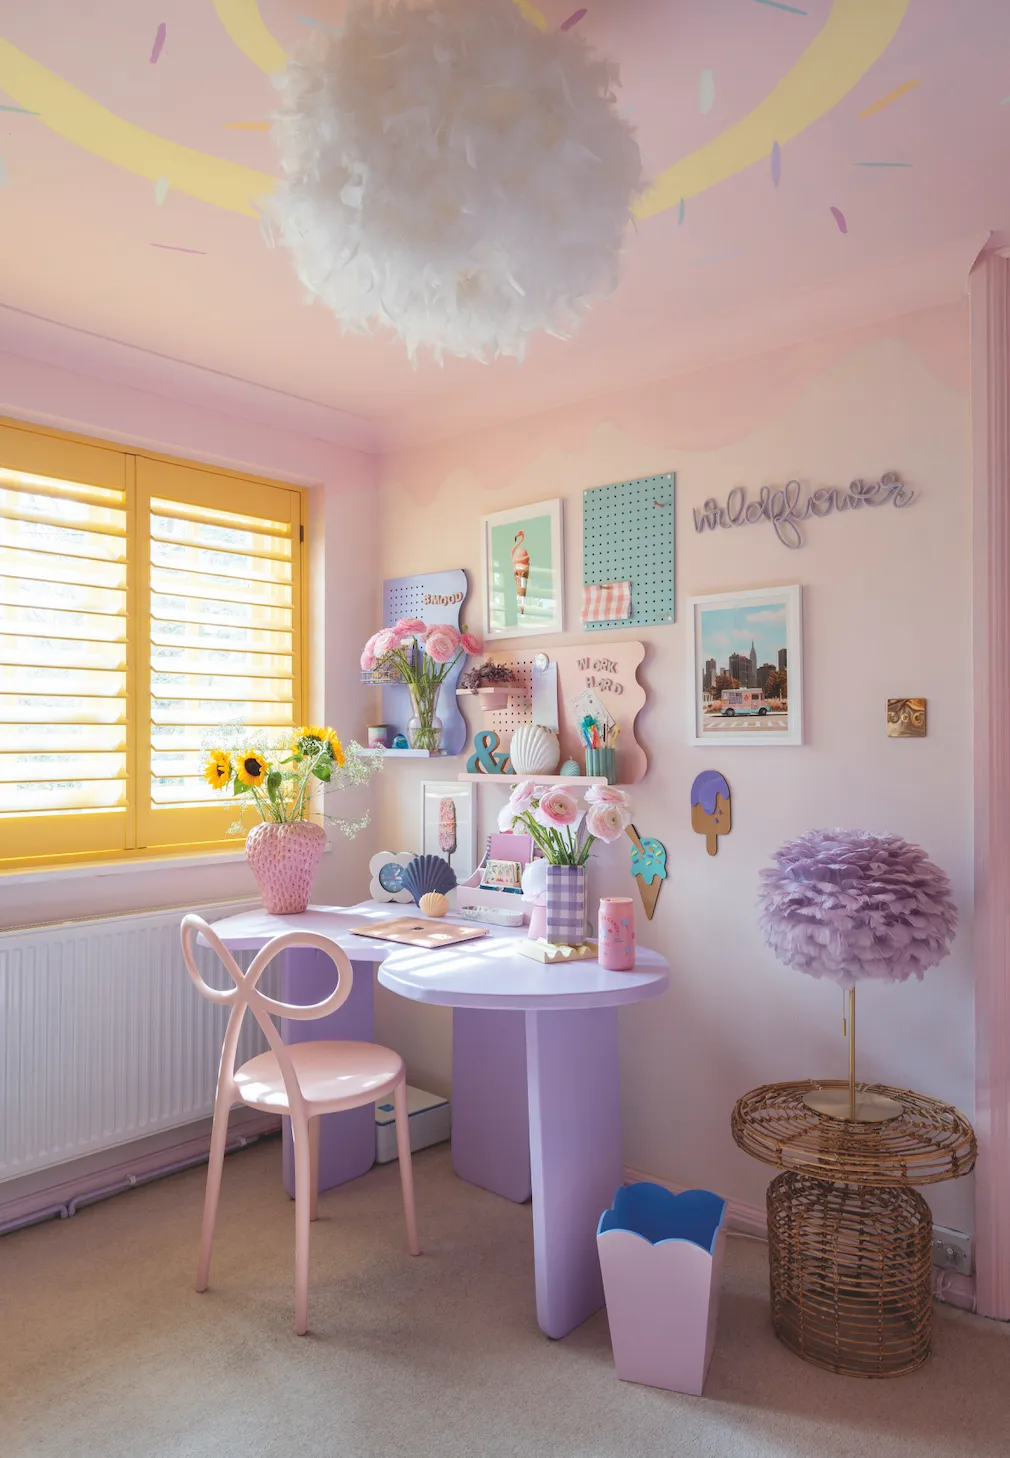 ‘The wavy lilac table is my favourite item in this room. It’s such a creative spot to work from. I brought texture to the scheme with these fun feather lampshades’